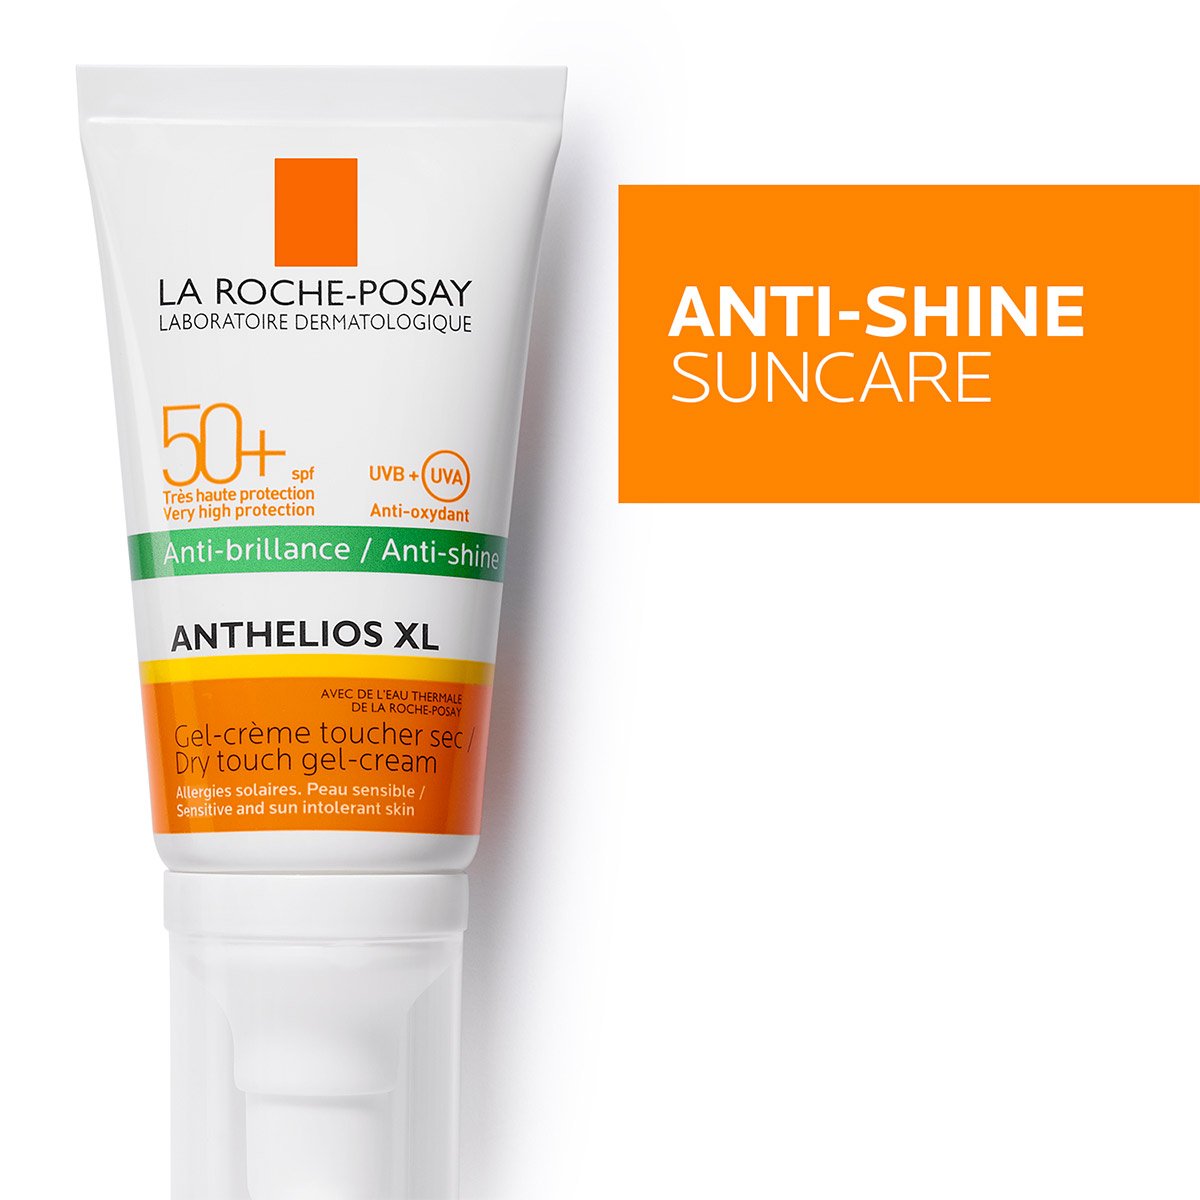 La Roche-Posay Anthelios XL Dry Touch Gel Cream SPF50+ 50ml, showing the front of the packaging